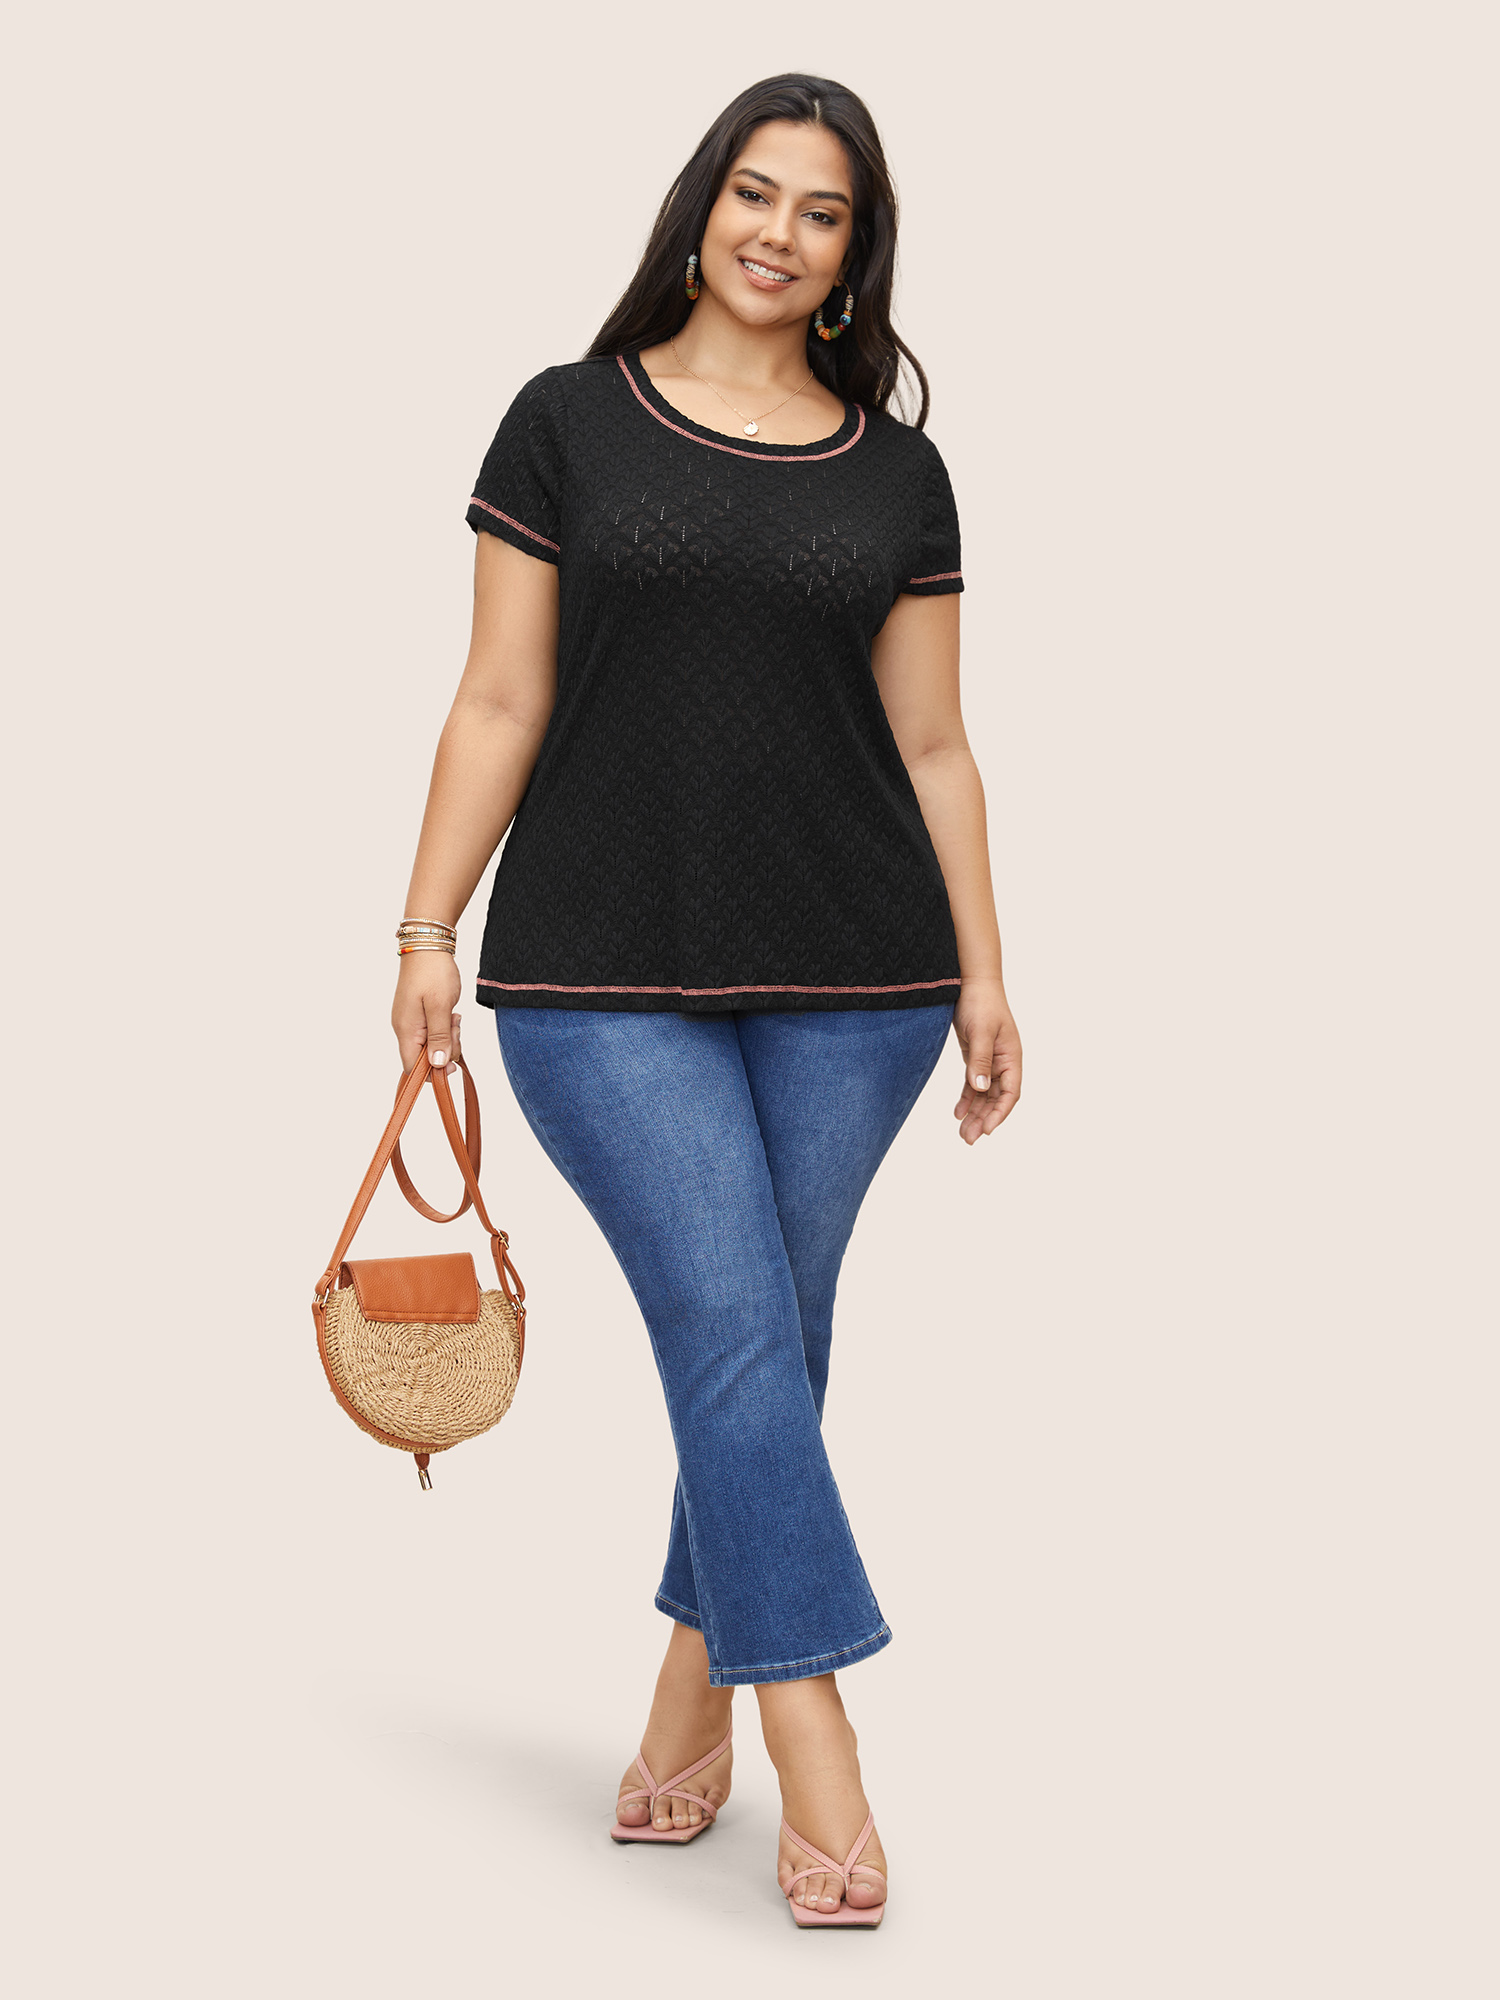 

Plus Size Crew Neck Lace Insert Contrast Stitch T-shirt Black Women Resort Contrast Round Neck Bodycon Vacation T-shirts BloomChic